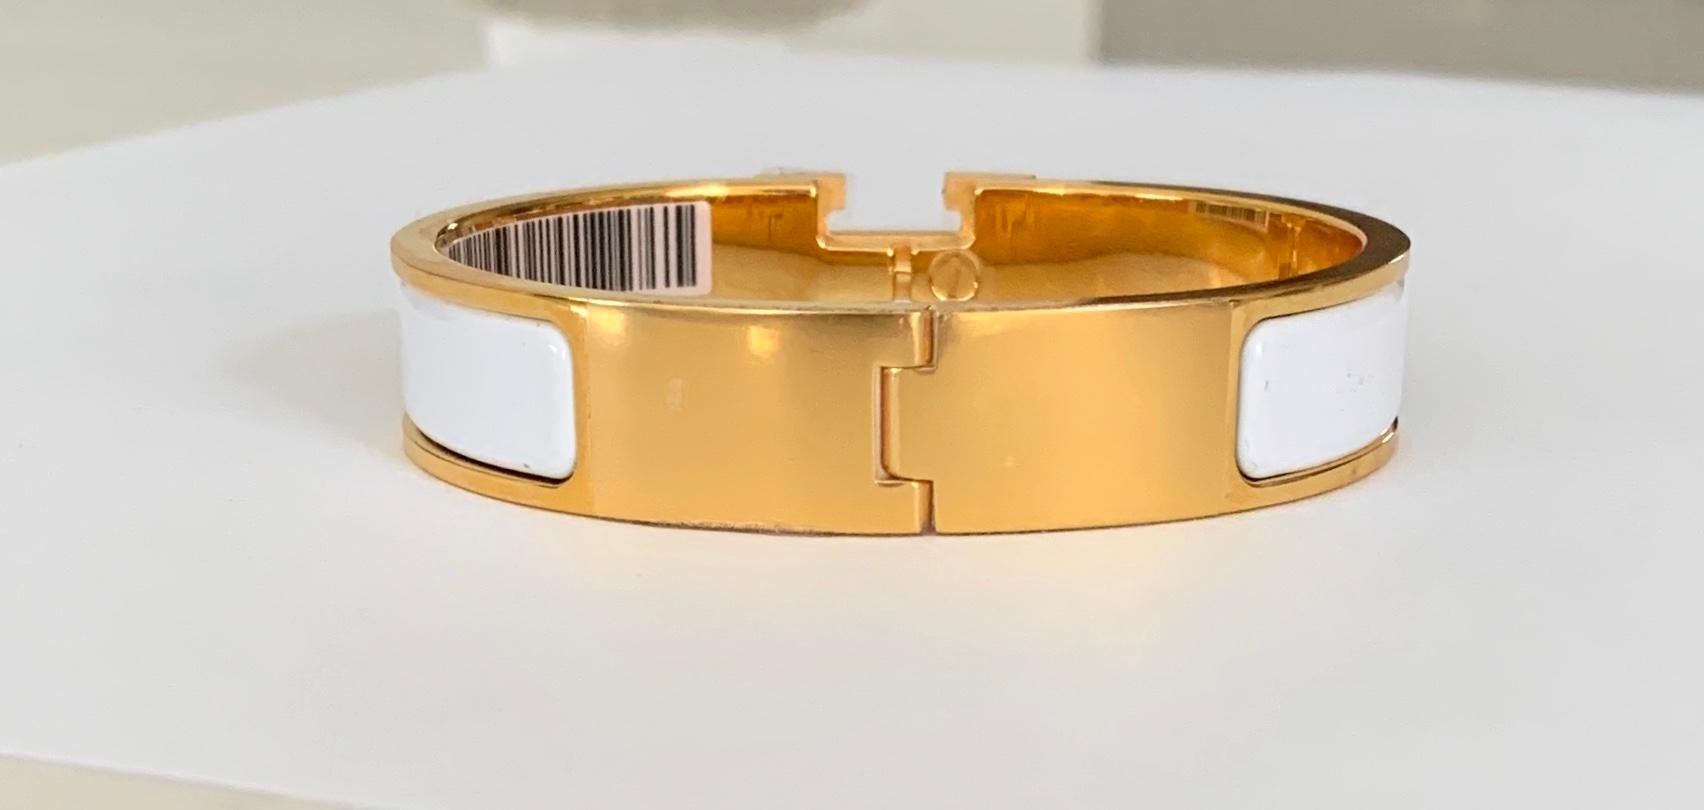 Hermes Clic H bracelet in Yellow Gold Plated 
Color: White
This is the Pm Size
Approx Circumference: 7